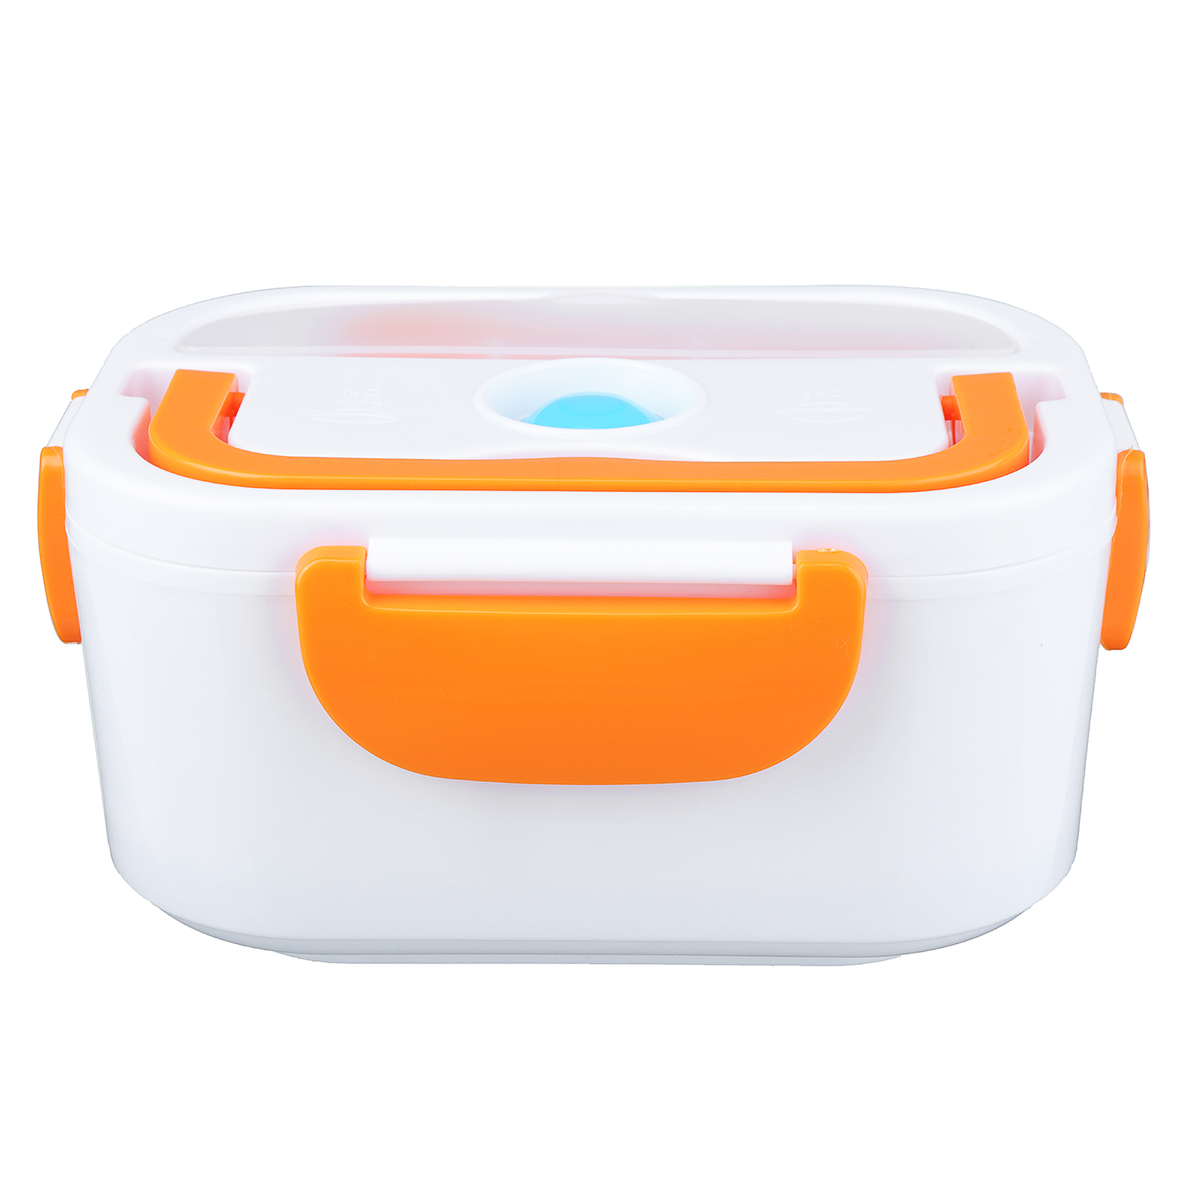 110V-Portable-Electric-Lunch-Box-Steamer-Rice-Cooker-Container-Heat-Preservation-1400151-4